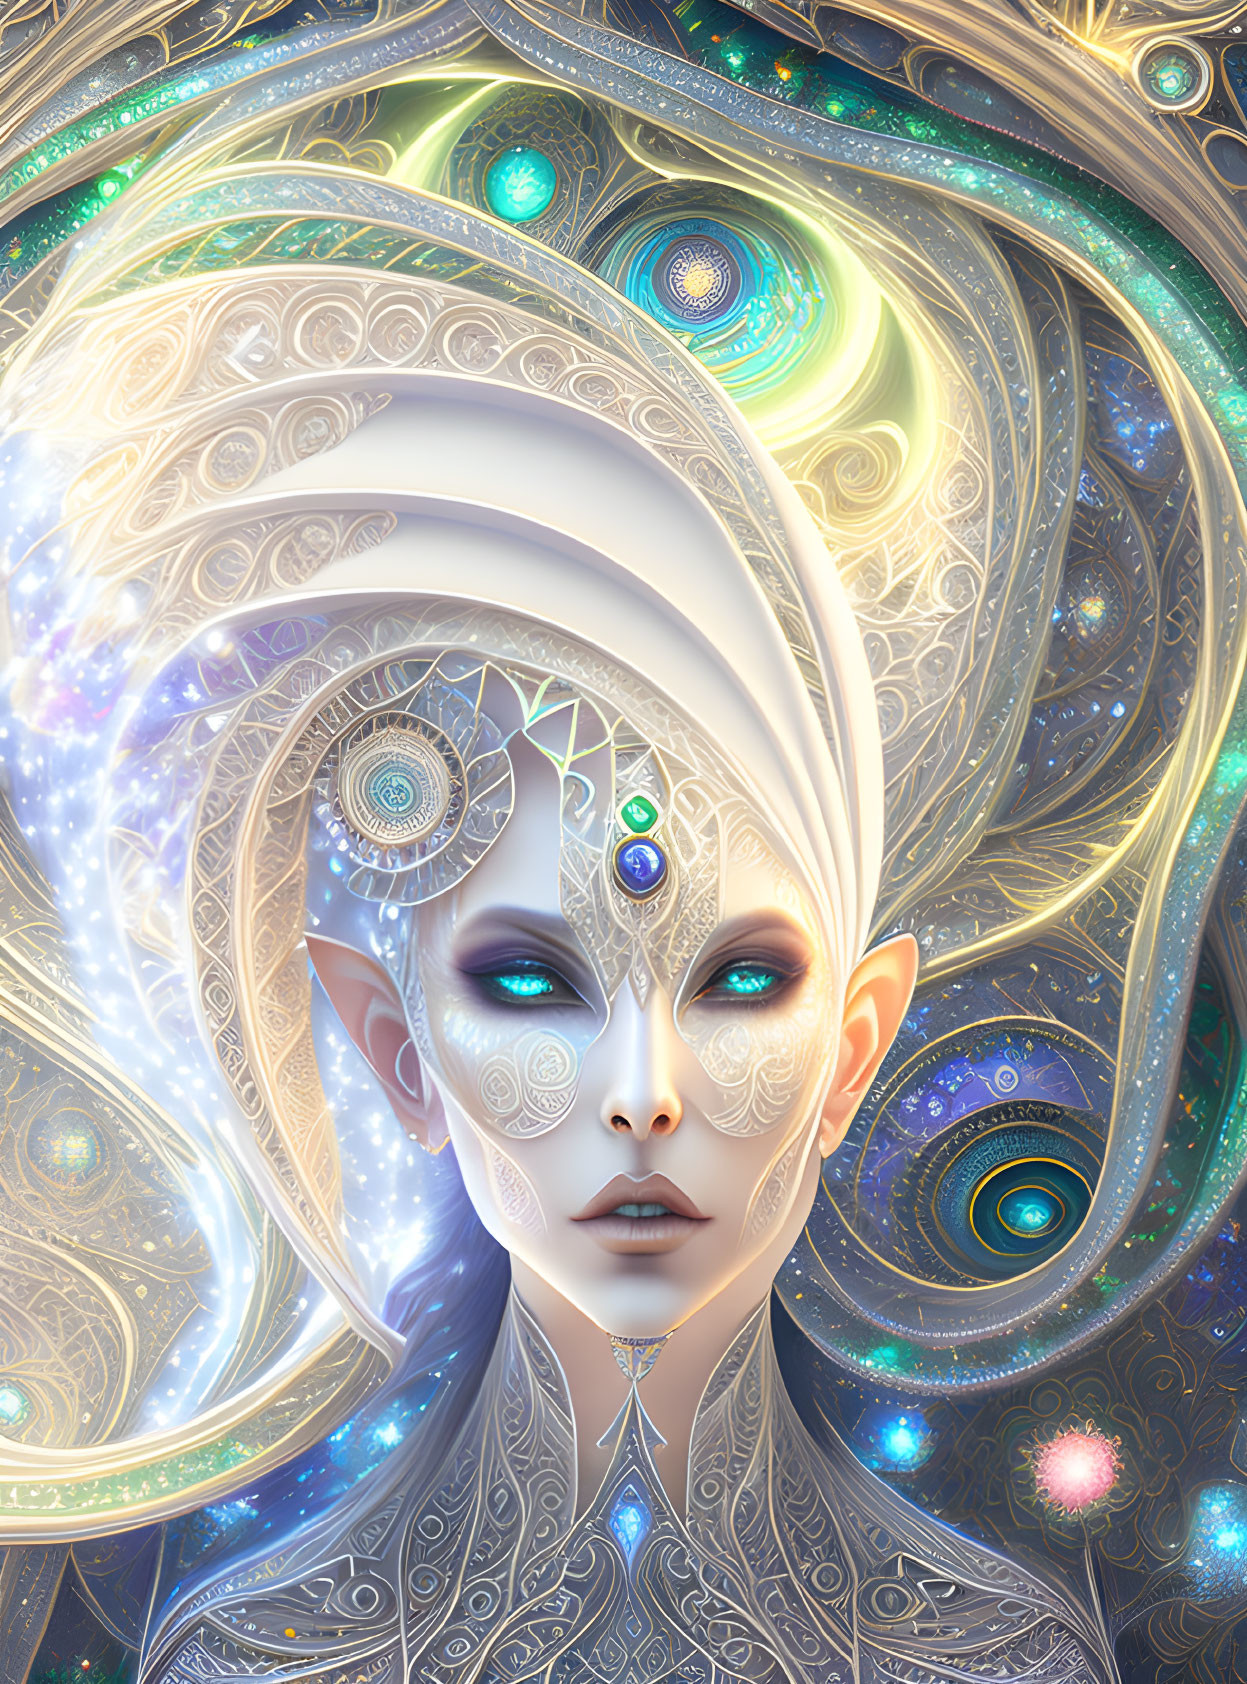 Ethereal Elf with Elaborate Silver Headpiece and Cosmic Patterns